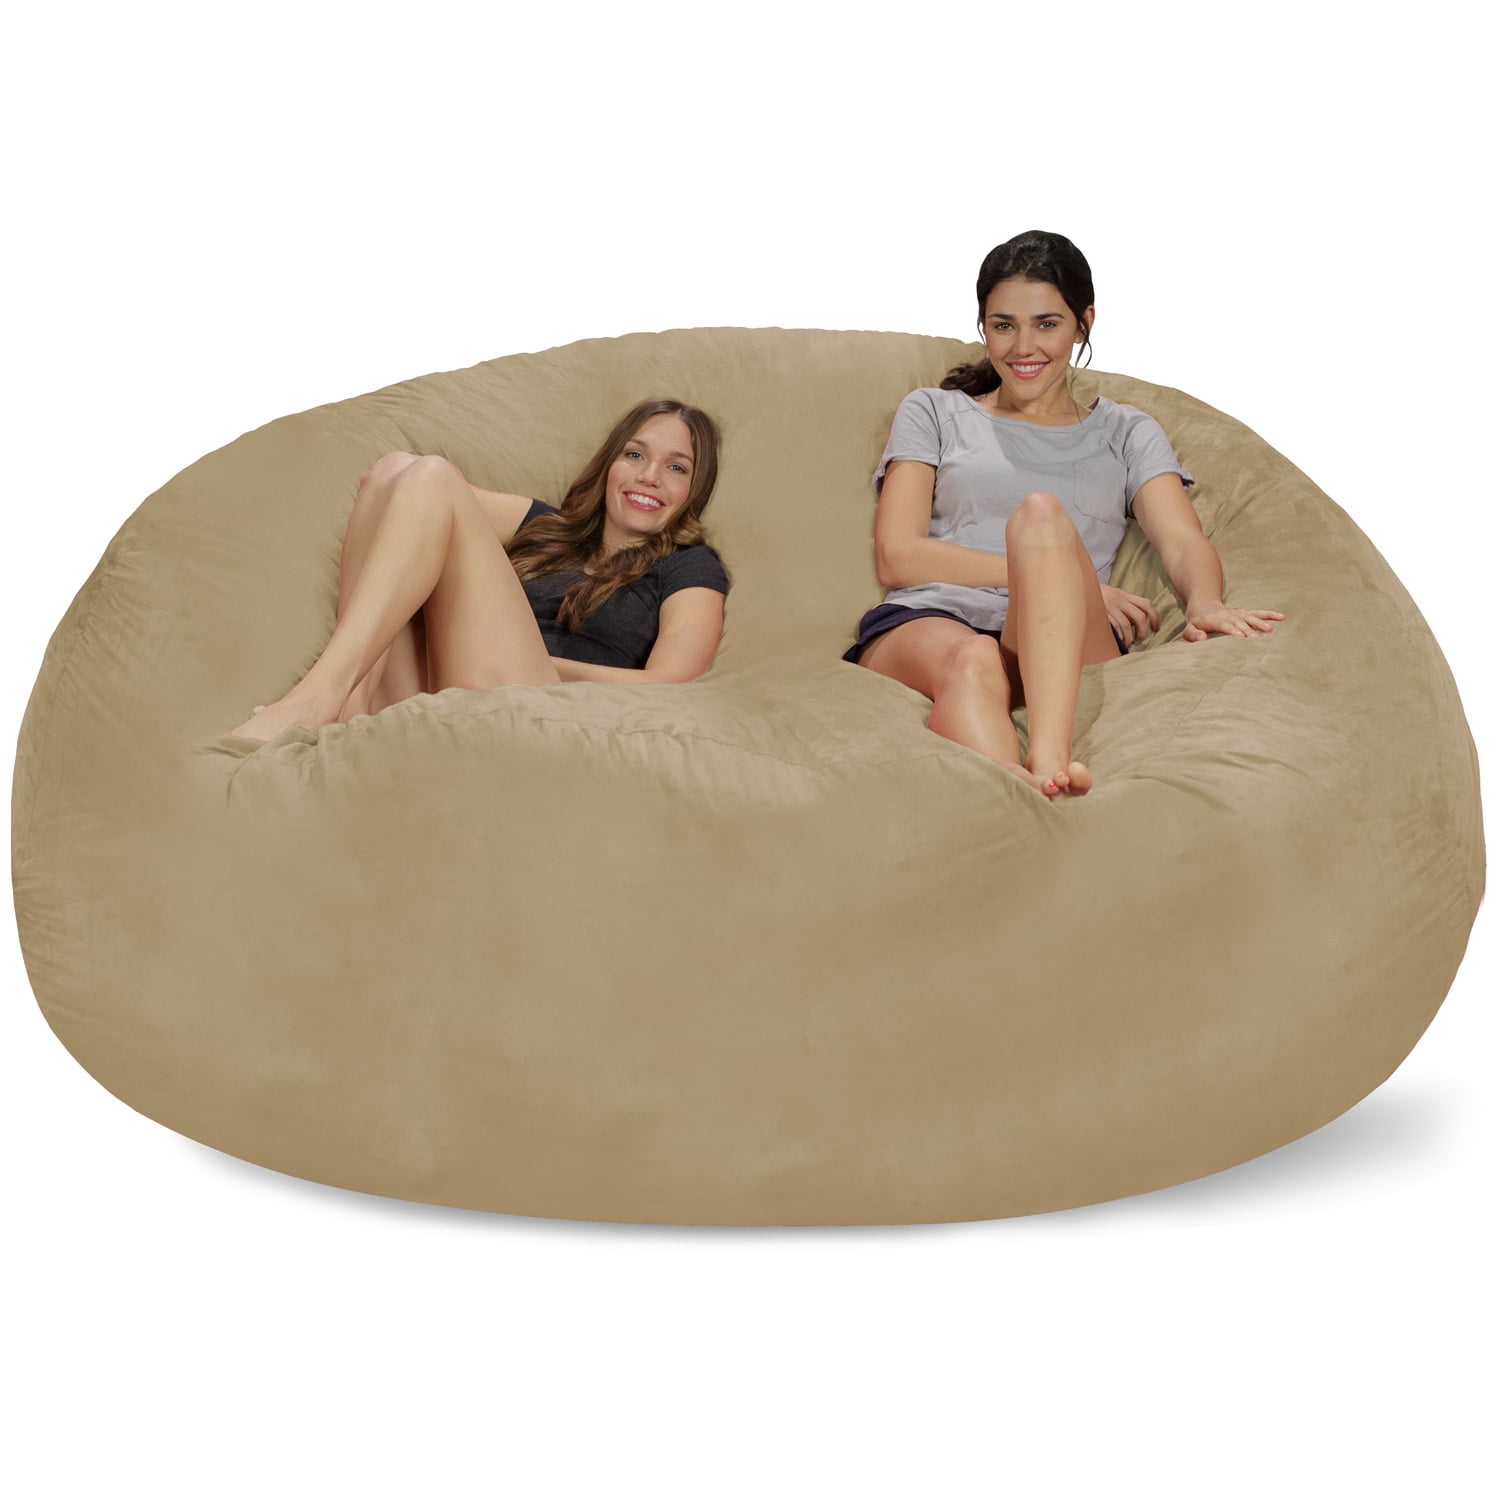 Chill Sack Bean Bag Chair, Memory Foam Lounger with Microsuede